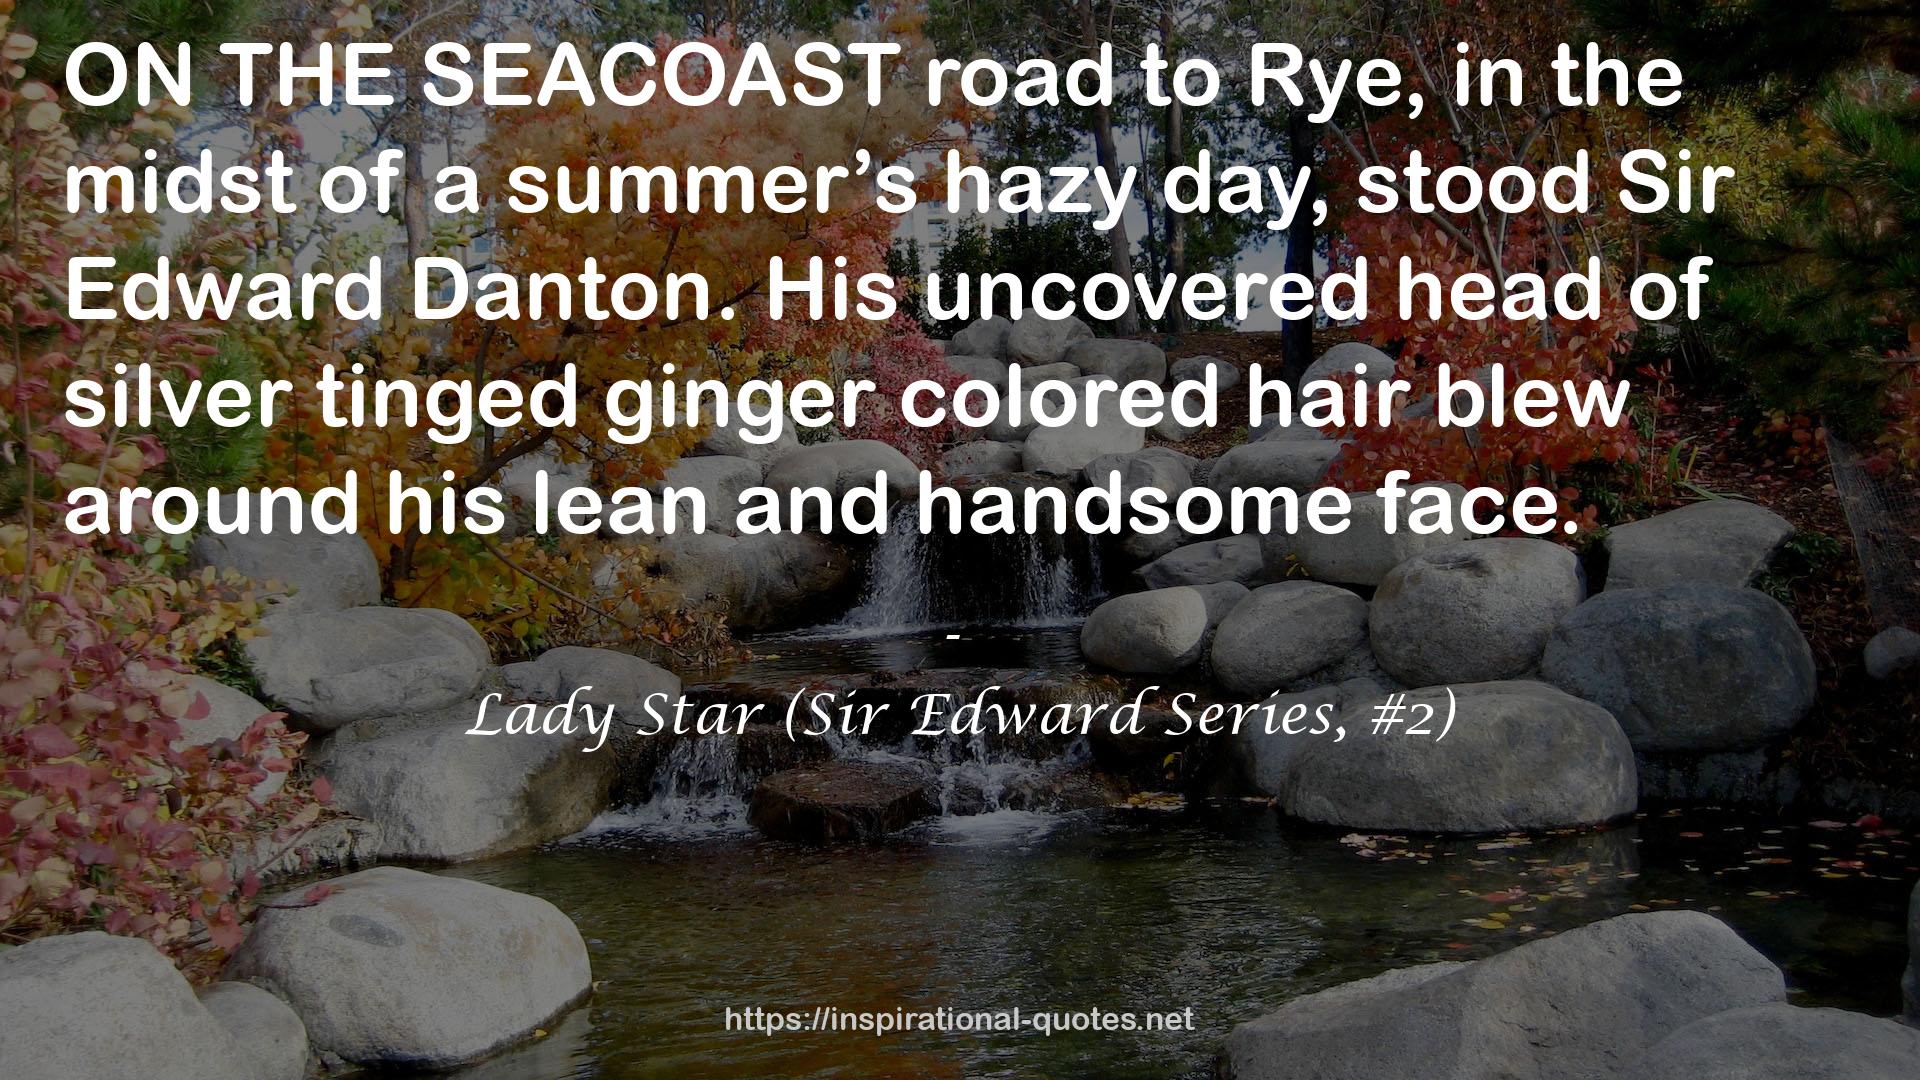 Lady Star (Sir Edward Series, #2) QUOTES